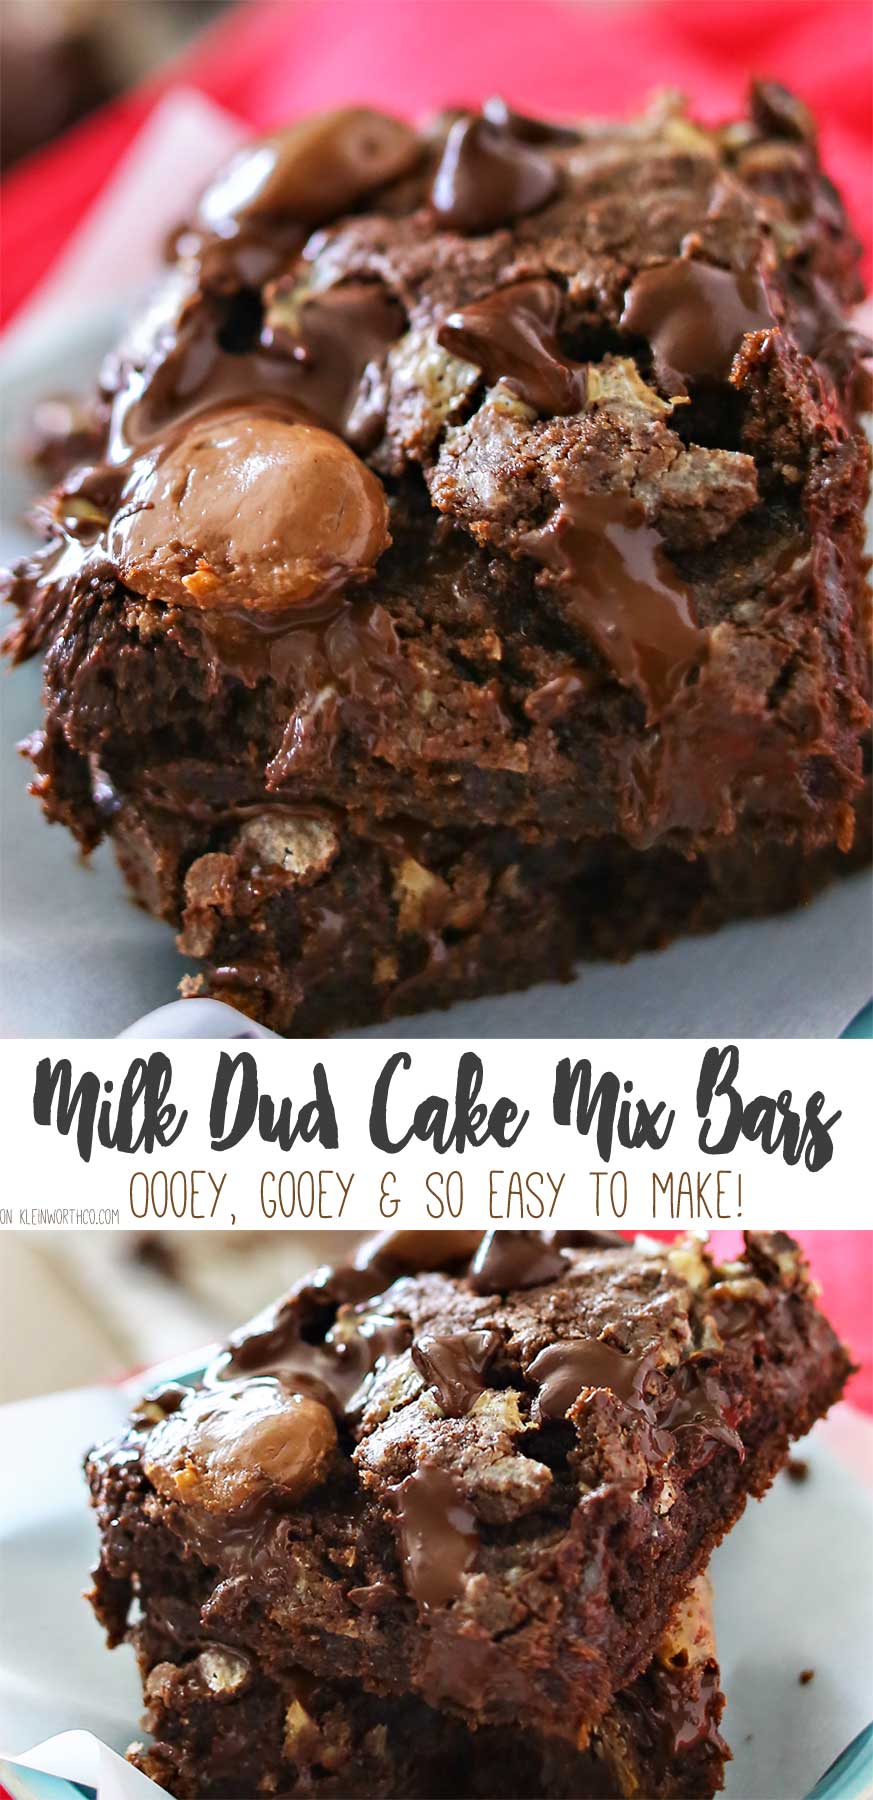 Milk Dud Cake Mix Bars are just another yummy bar recipe that is a MUST MAKE! Incredibly simple & easy desserts don't get any more delicious than this.